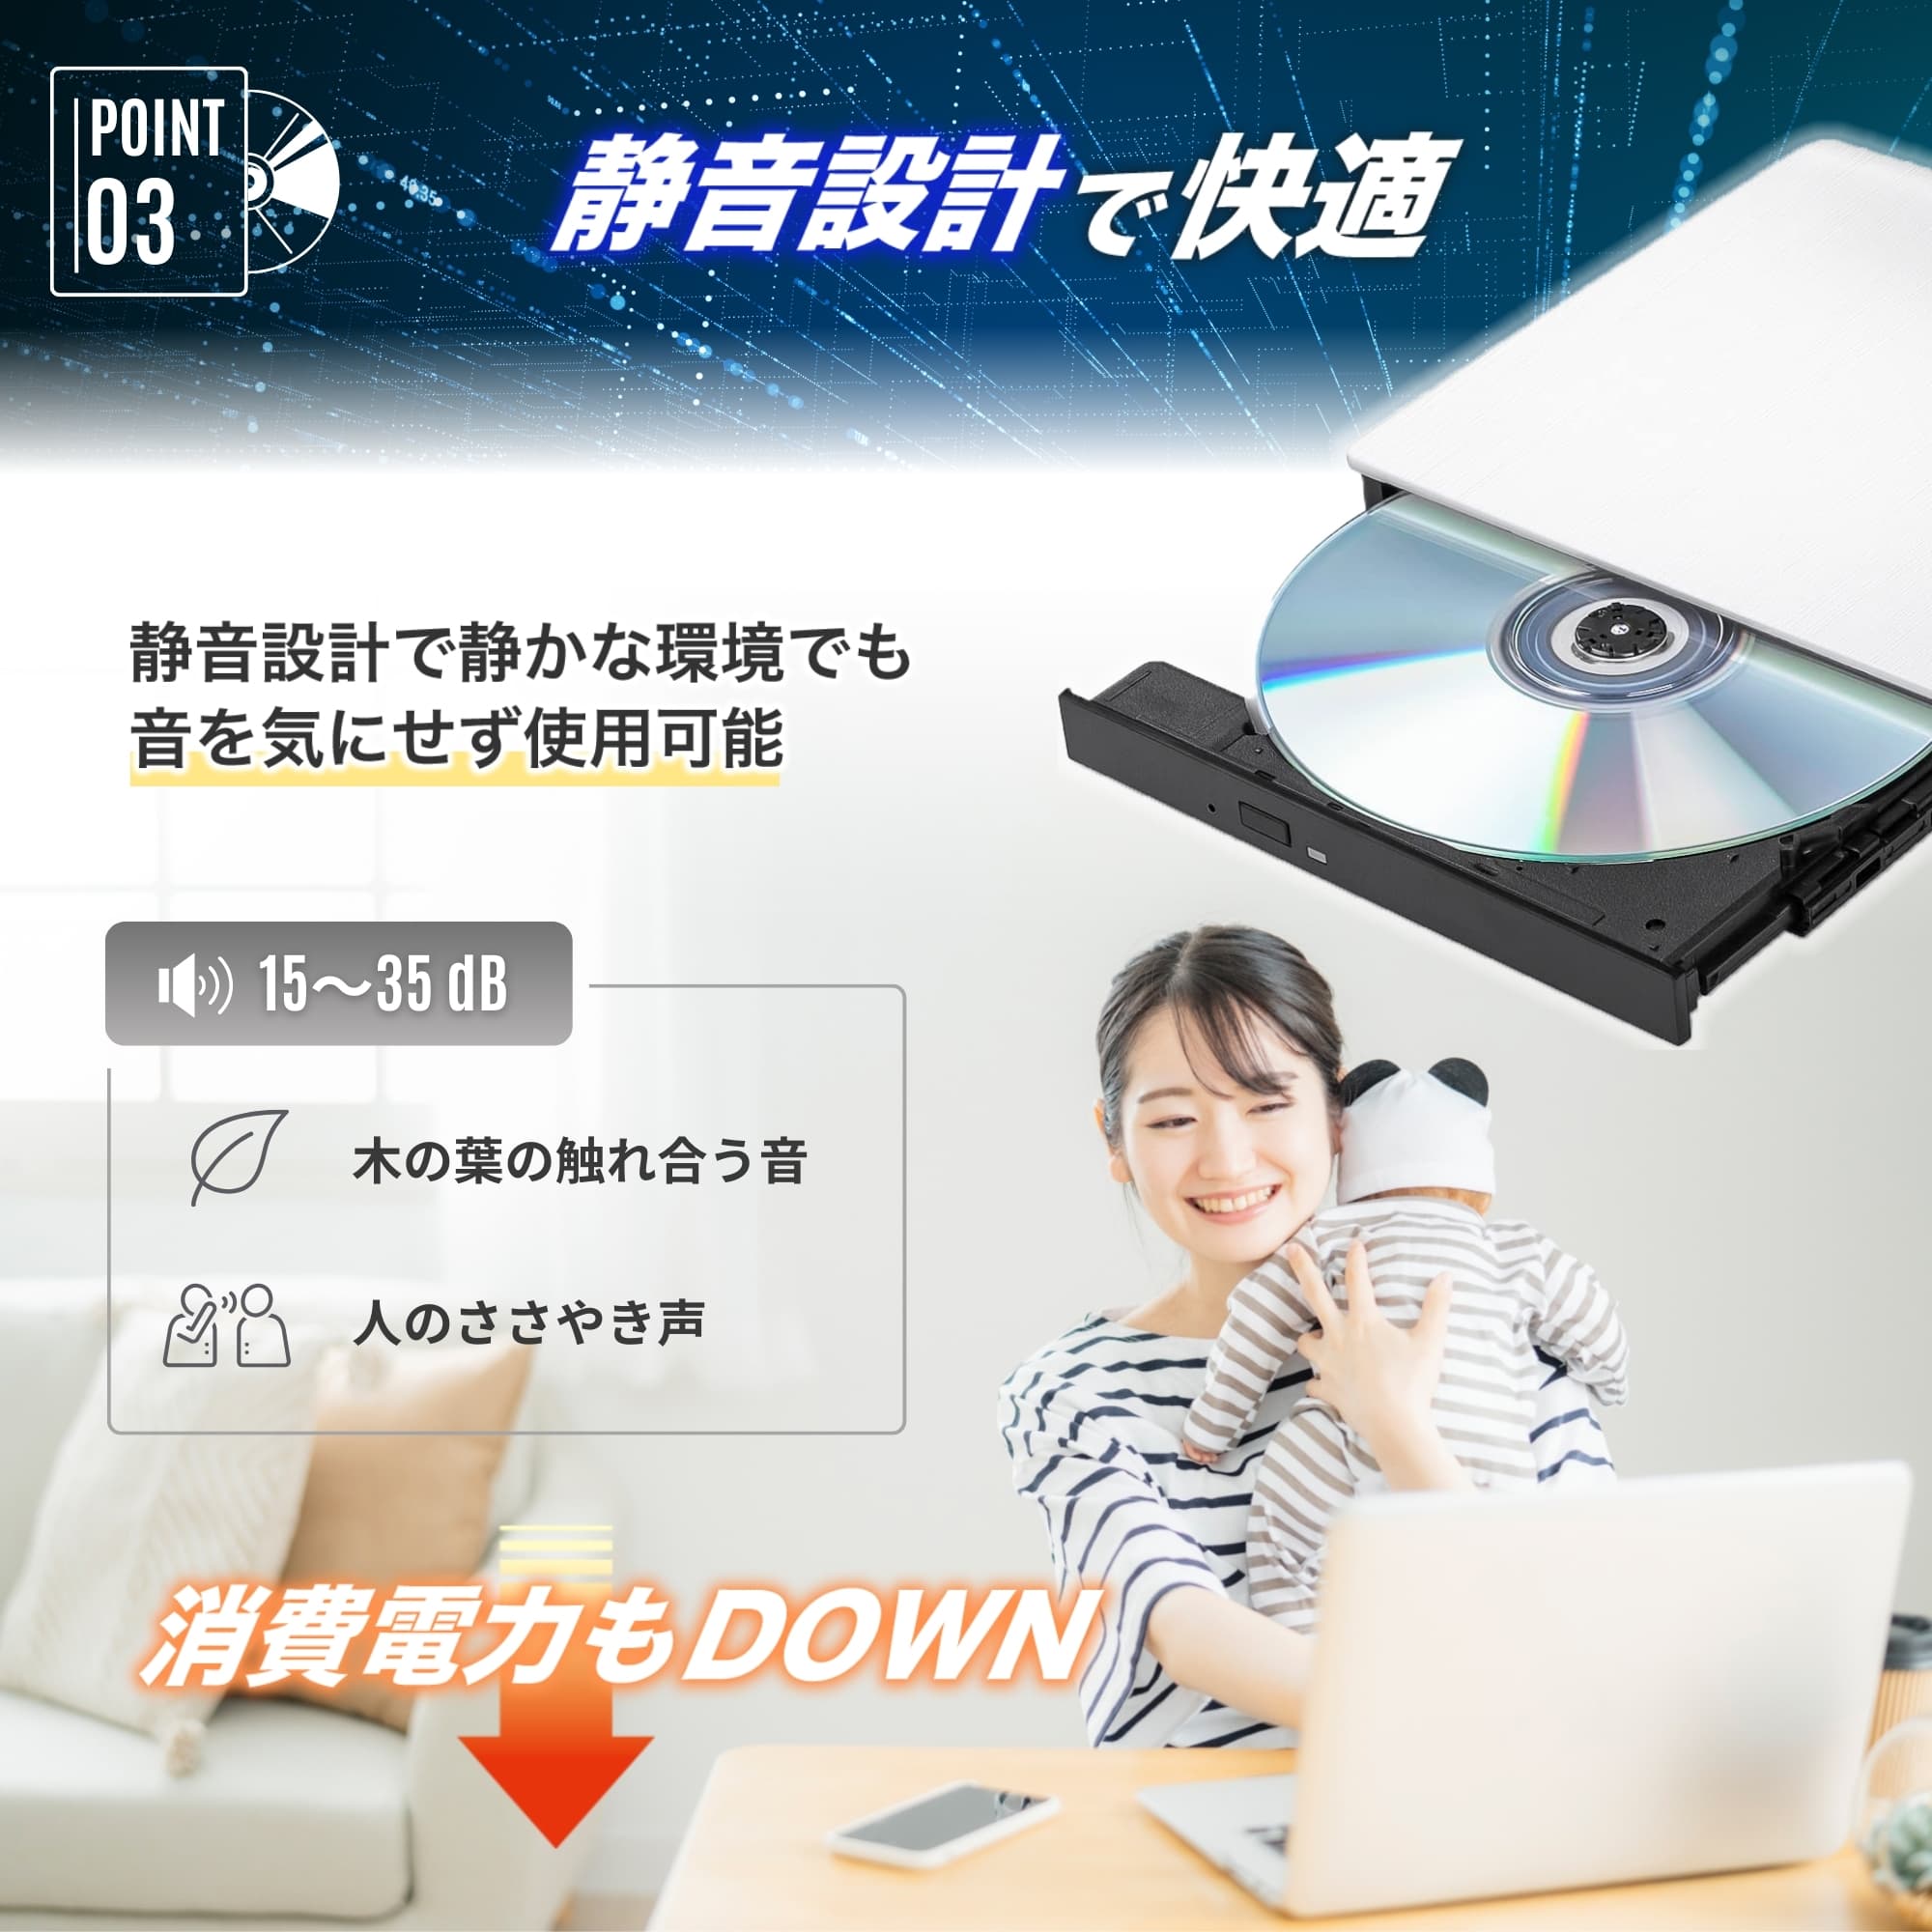 DVD Drive usb3.0 personal computer windows CD portable connection attached outside black writing type-c easy high speed mac player white quiet sound high quality 